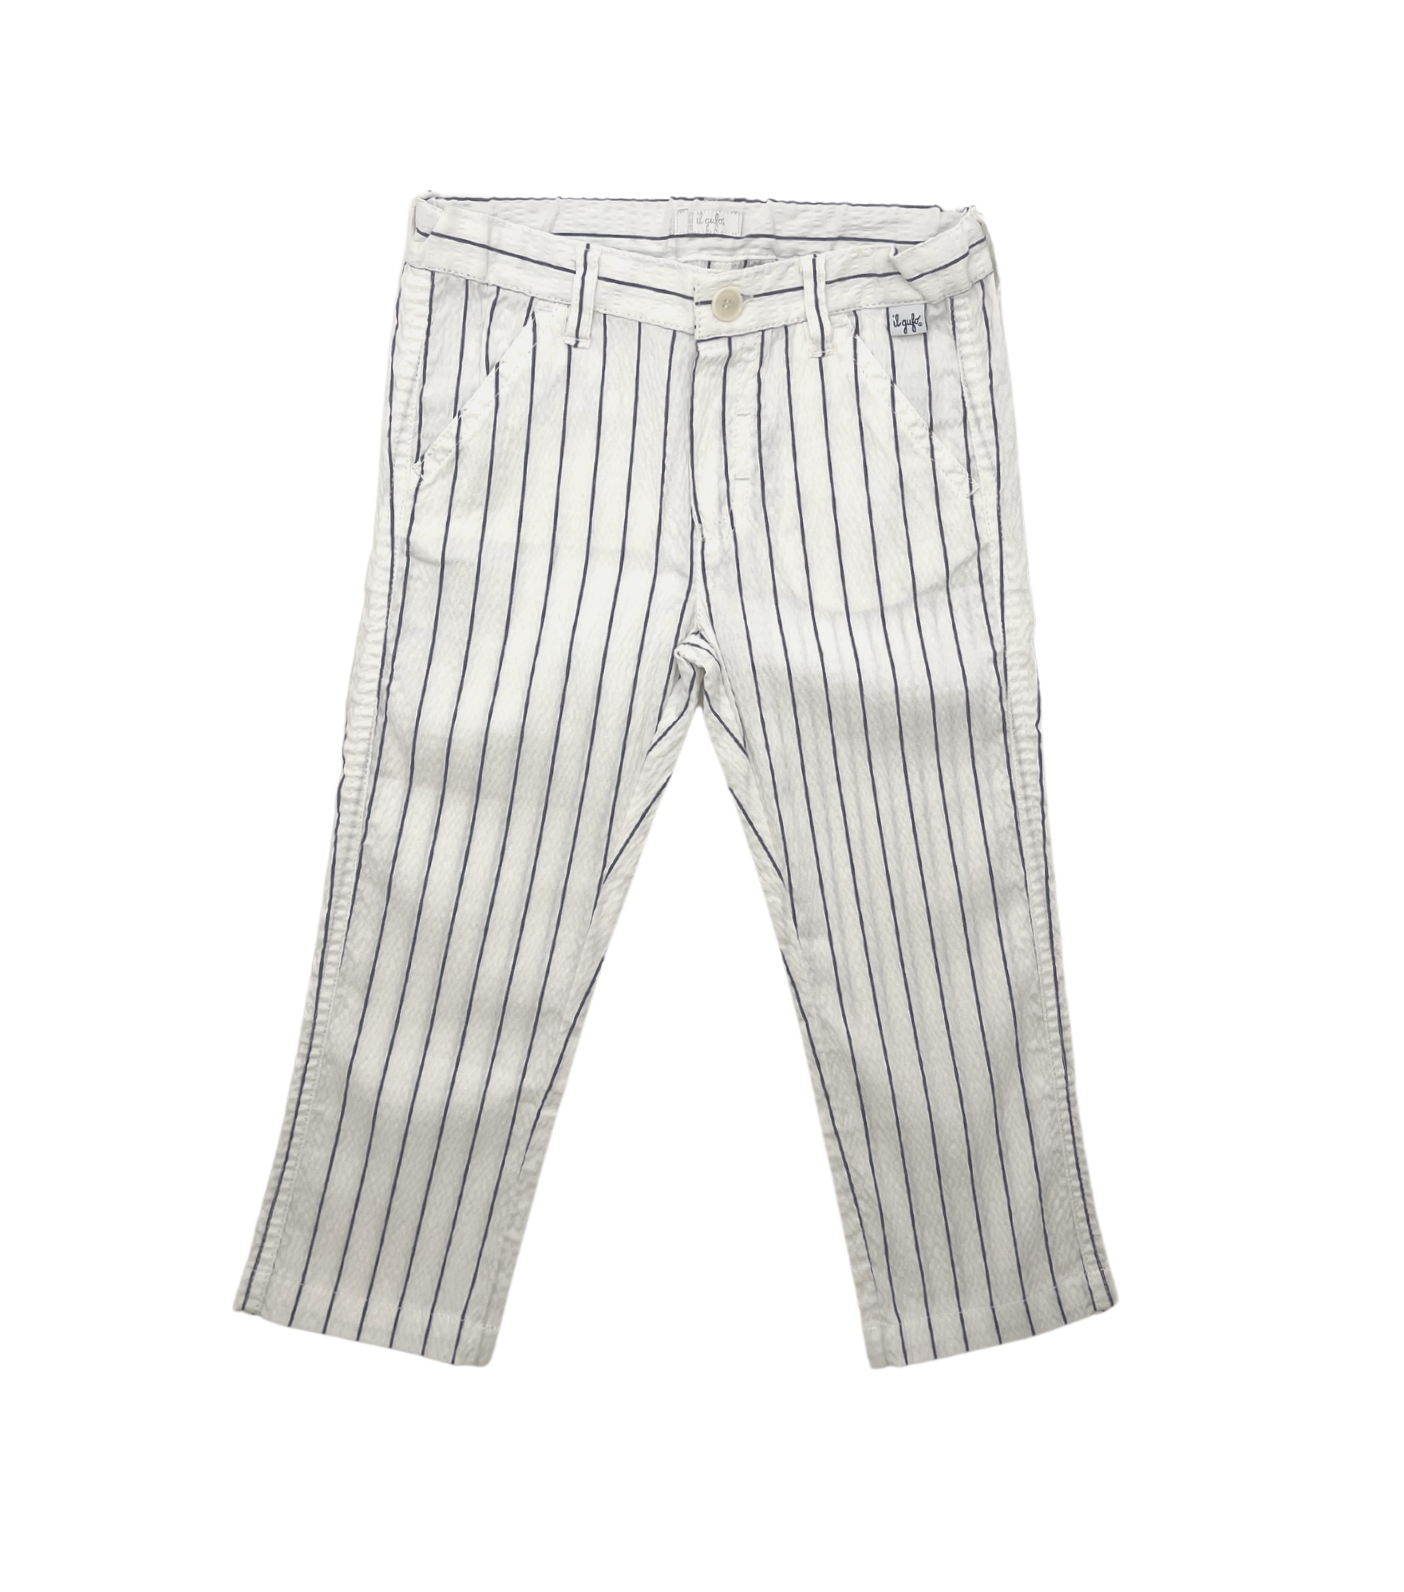 IL GUFO - White &amp; blue striped pants - 3 years old